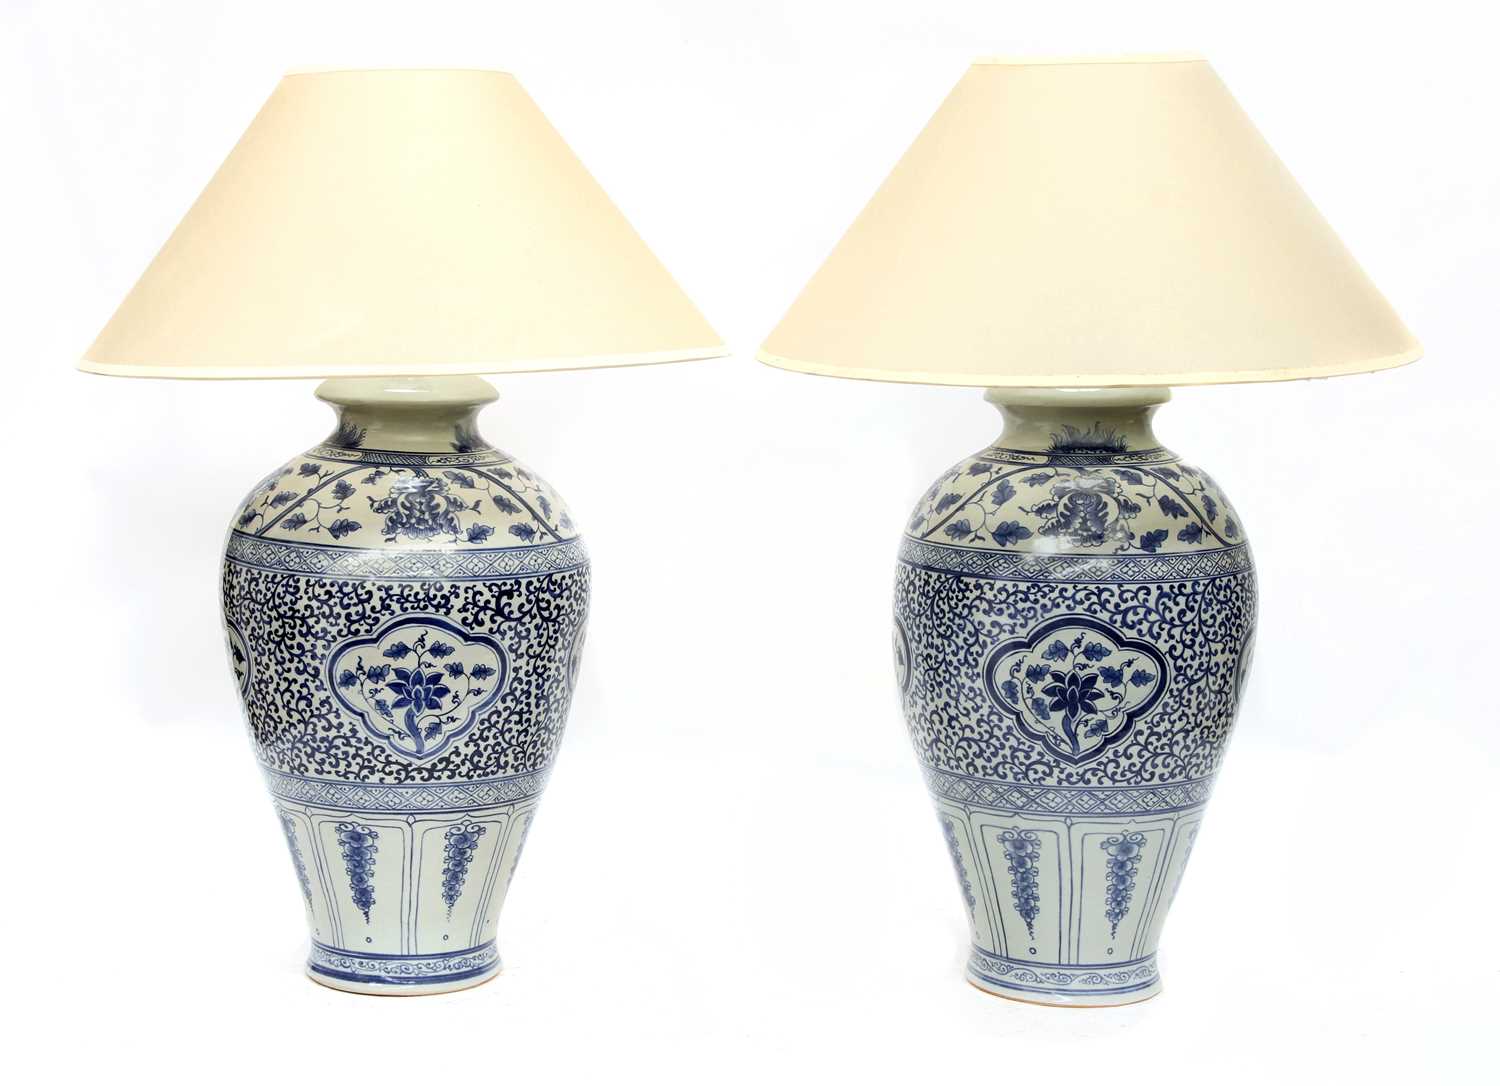 Lot 96 - A pair of large blue and white Chinese porcelain table lamps